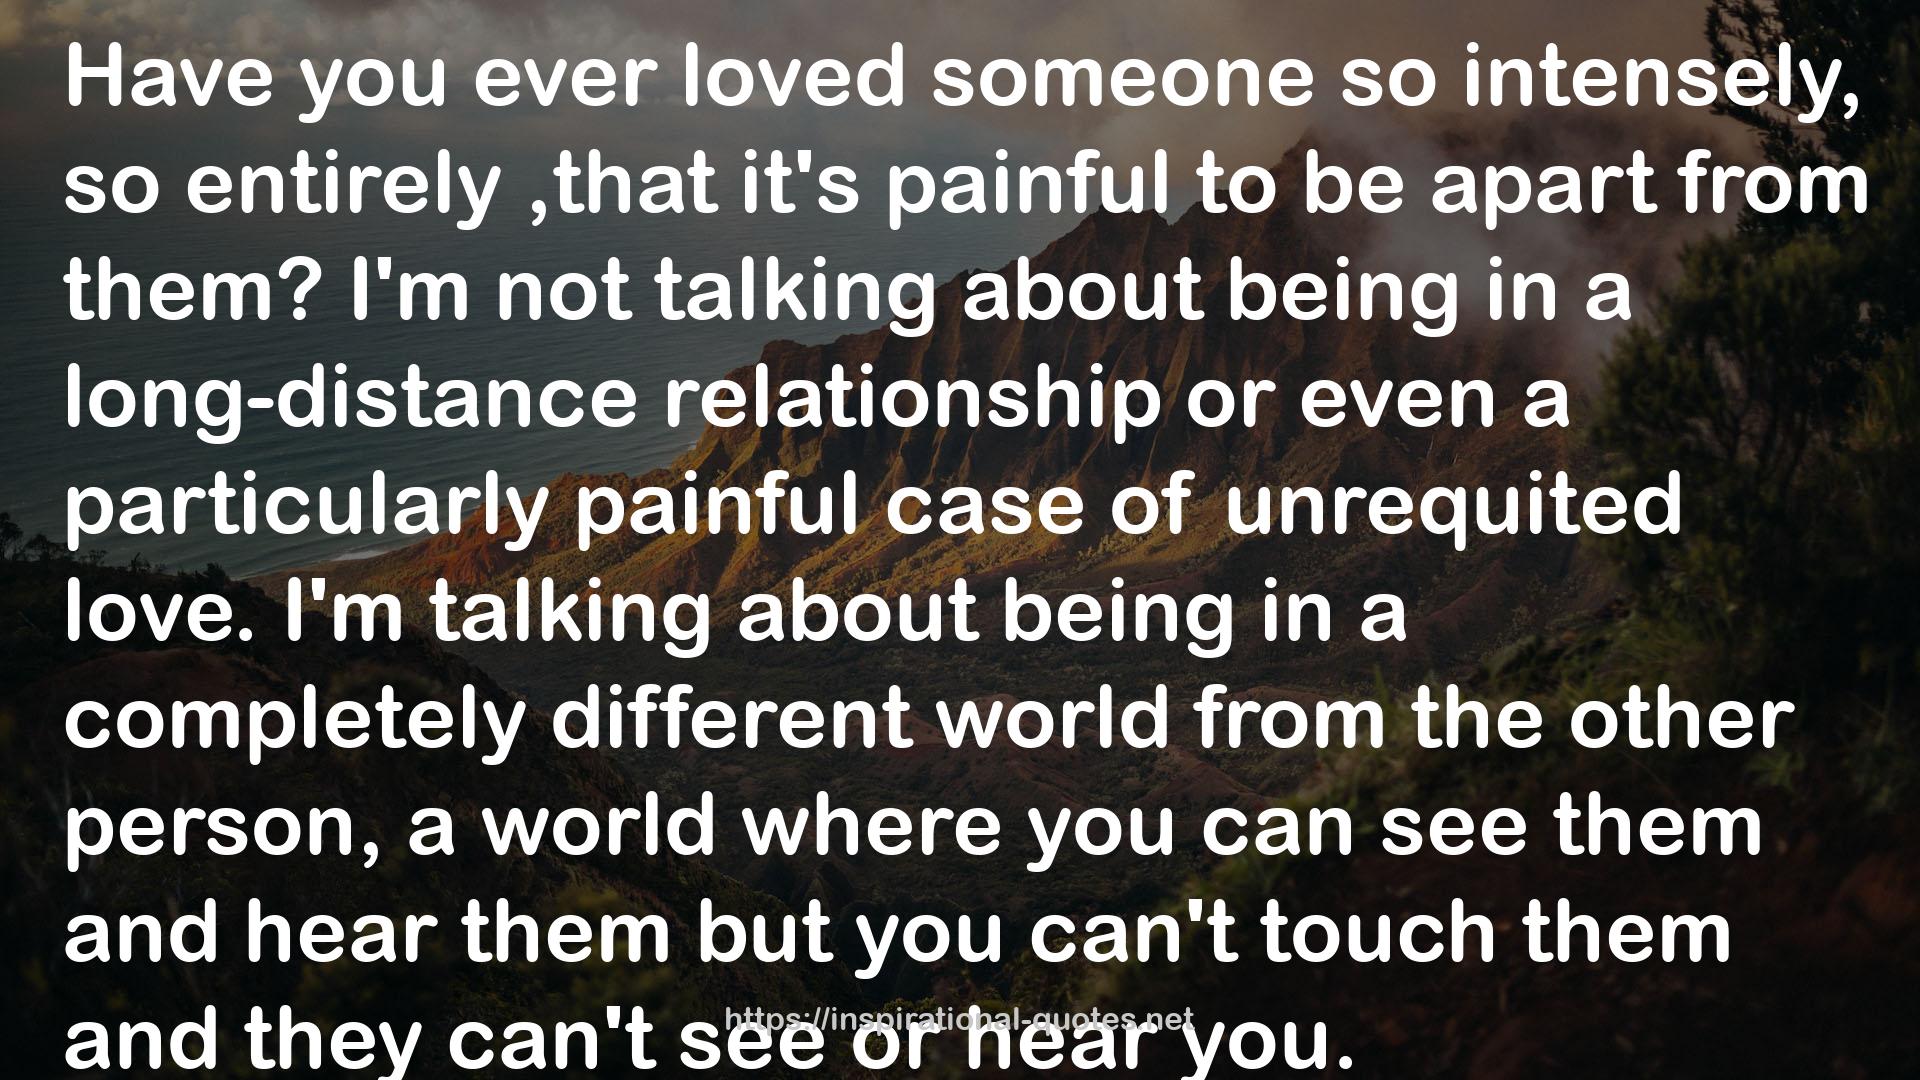 a long-distance relationship  QUOTES